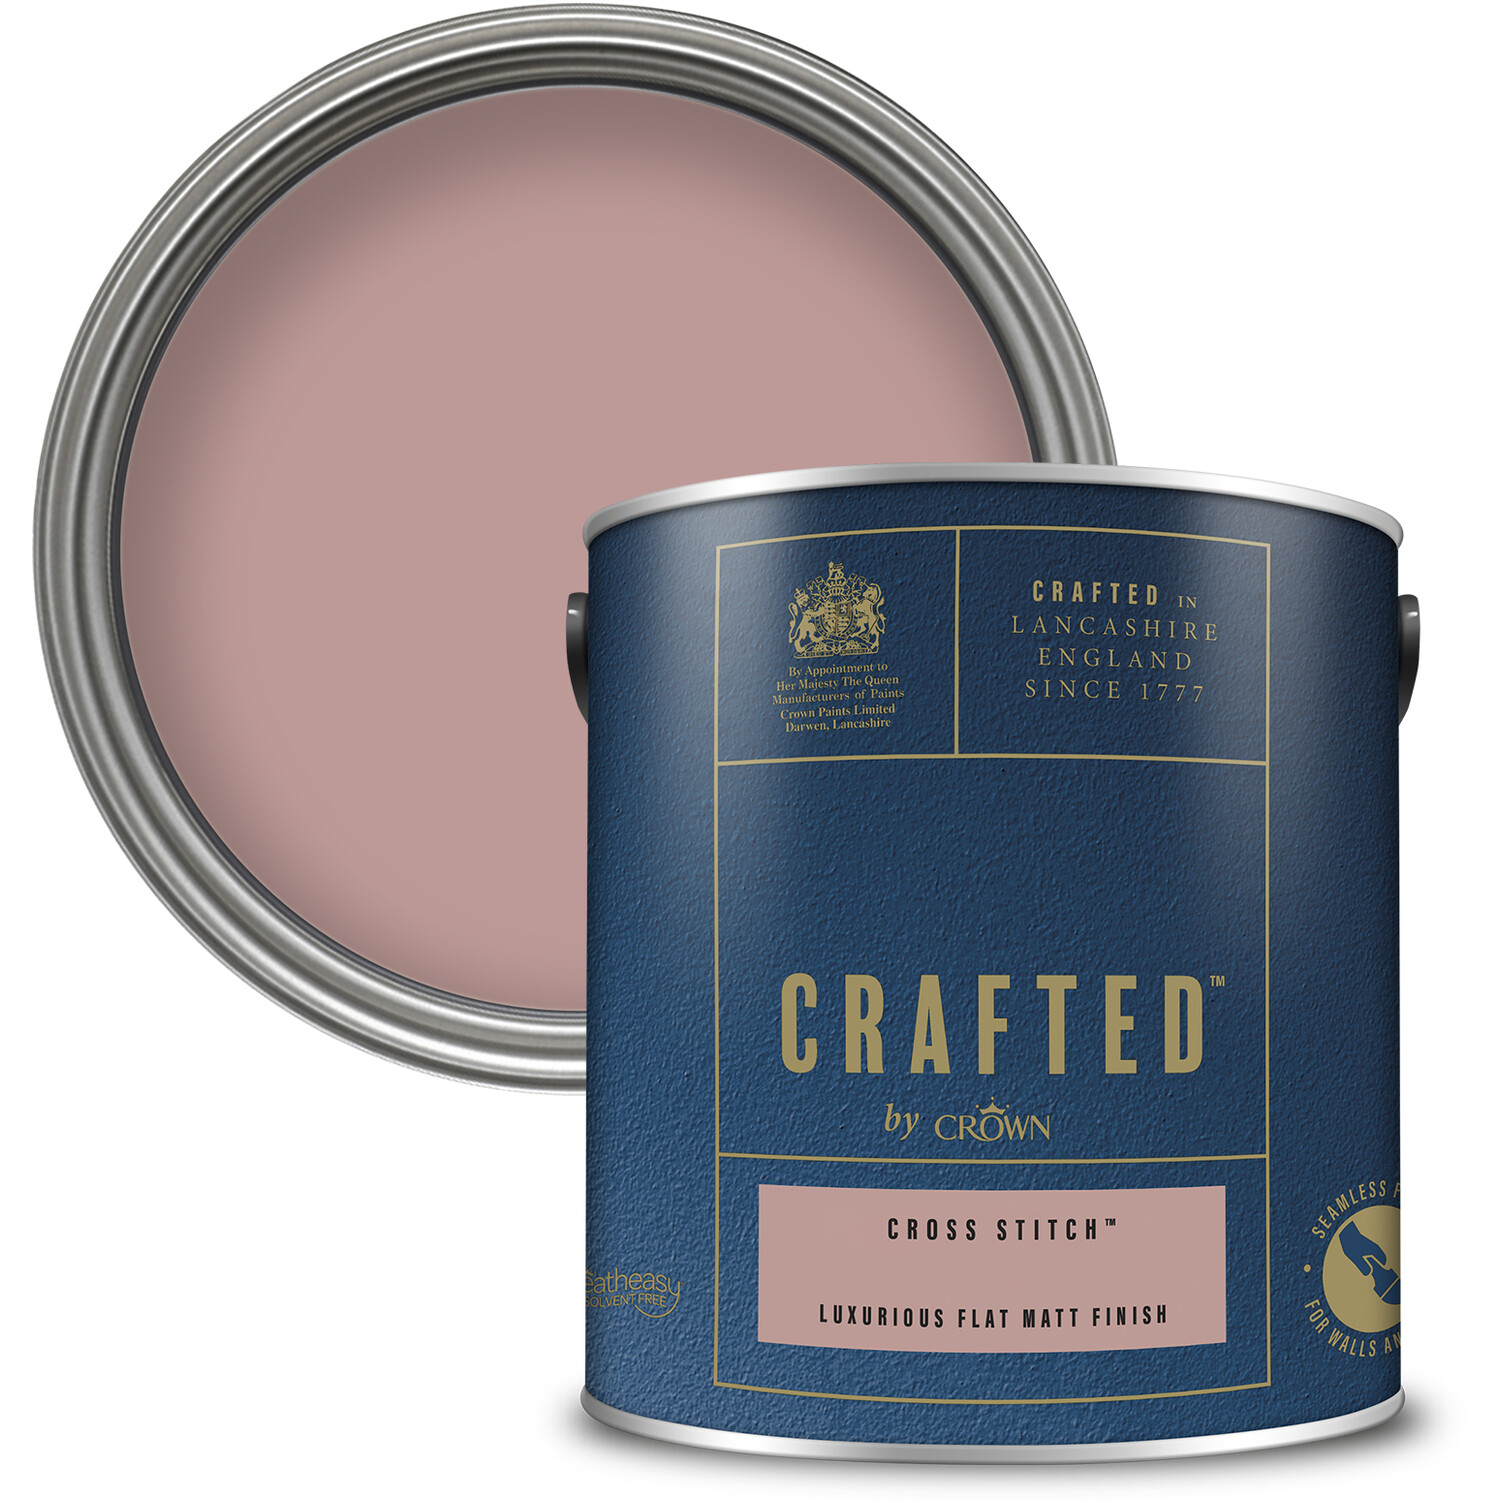 CRAFTED™ by Crown Emulsion Interior Paint - Metallic Rose Gold - 1.25L